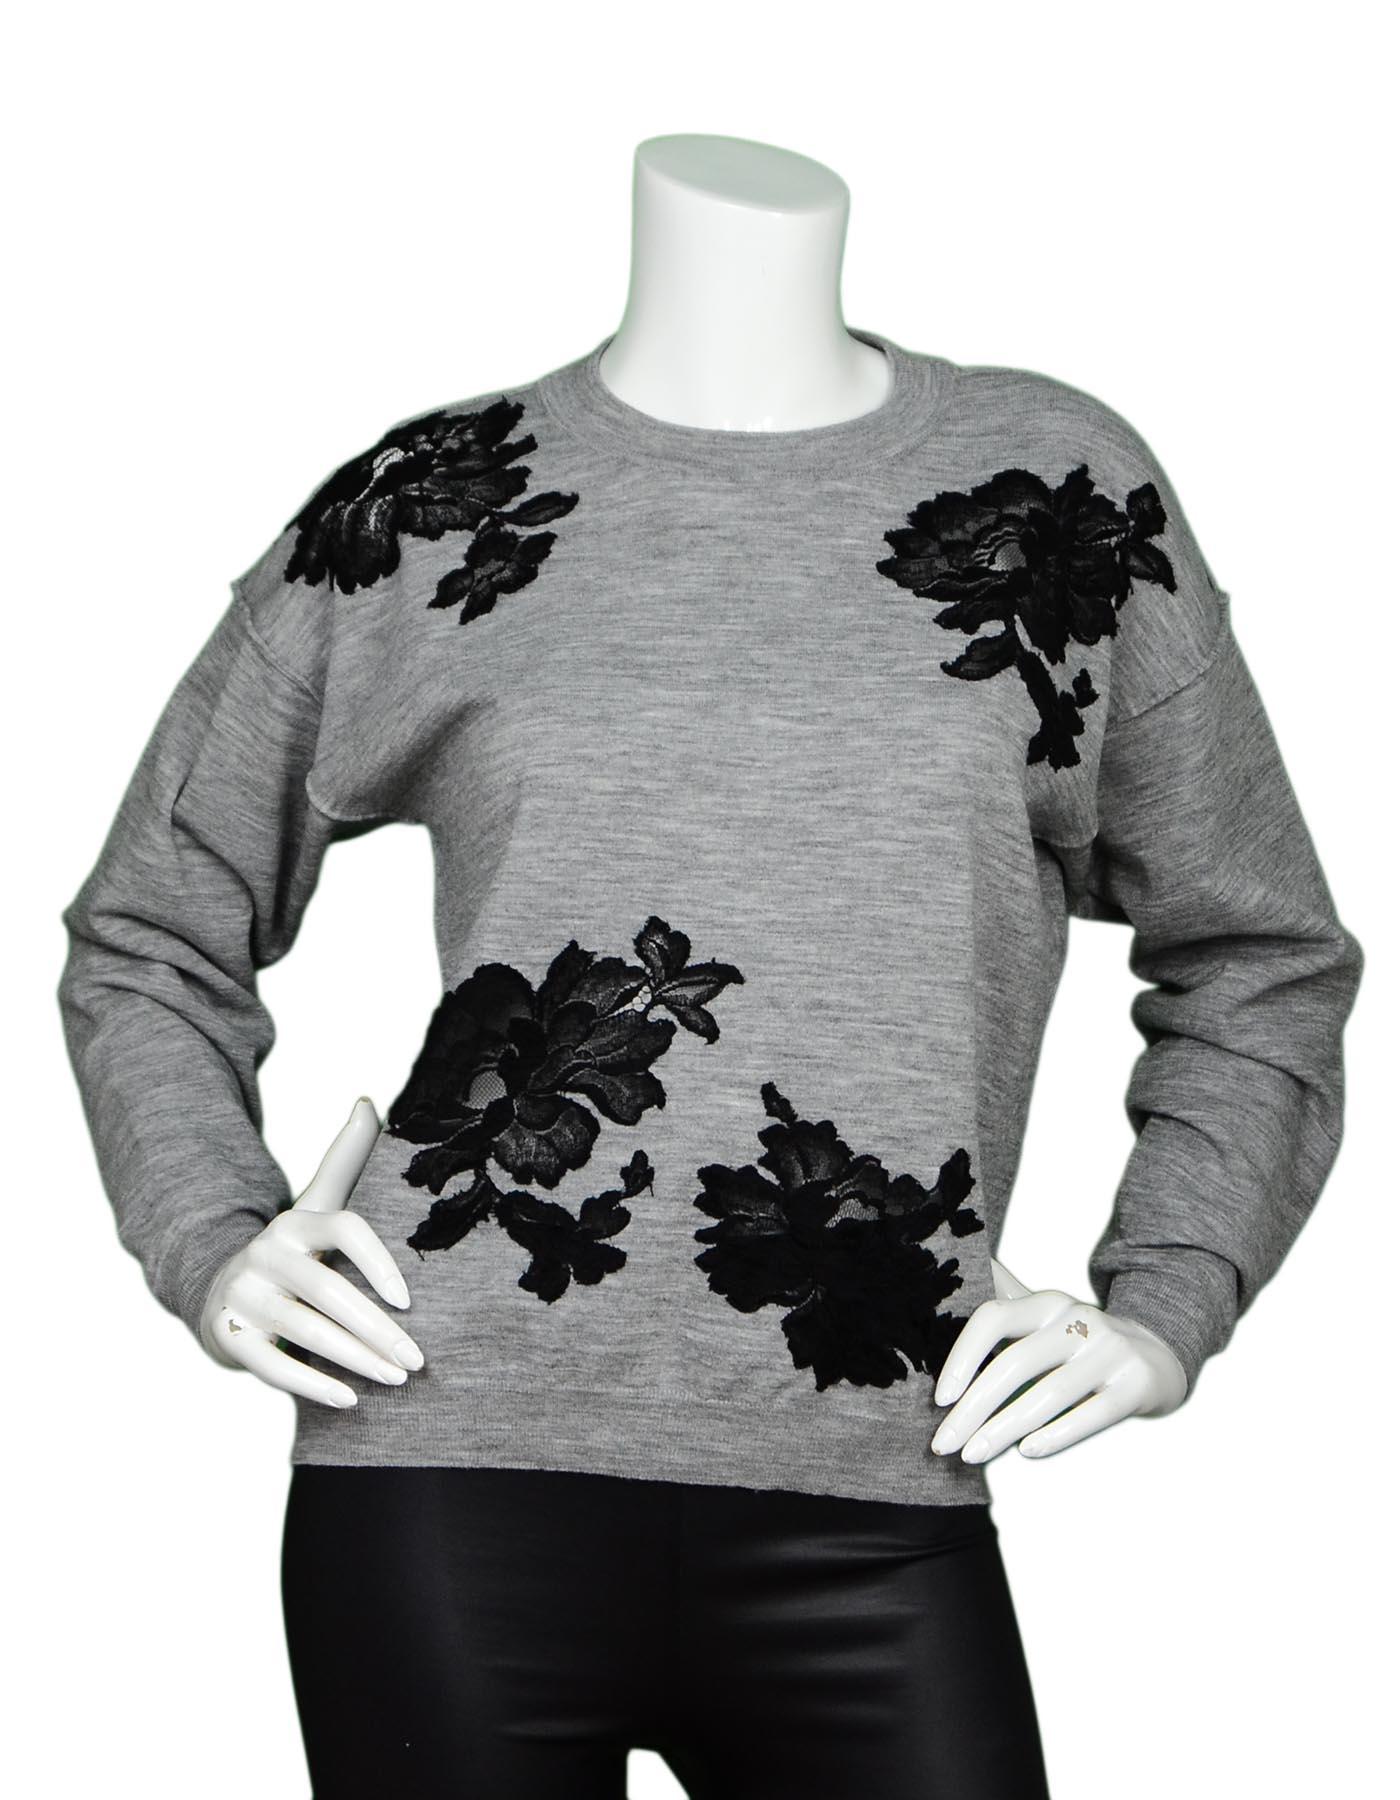 Lanvin Grey Sweater W/ Black Lace Flowers Sz M

Made In: Italy
Color: Grey
Materials: 87% wool, 13% polyester, lace- 82% cotton, 18% nylon
Opening/Closure: Pull over
Overall Condition: Excellent pre-owned condition, with exception of missing size